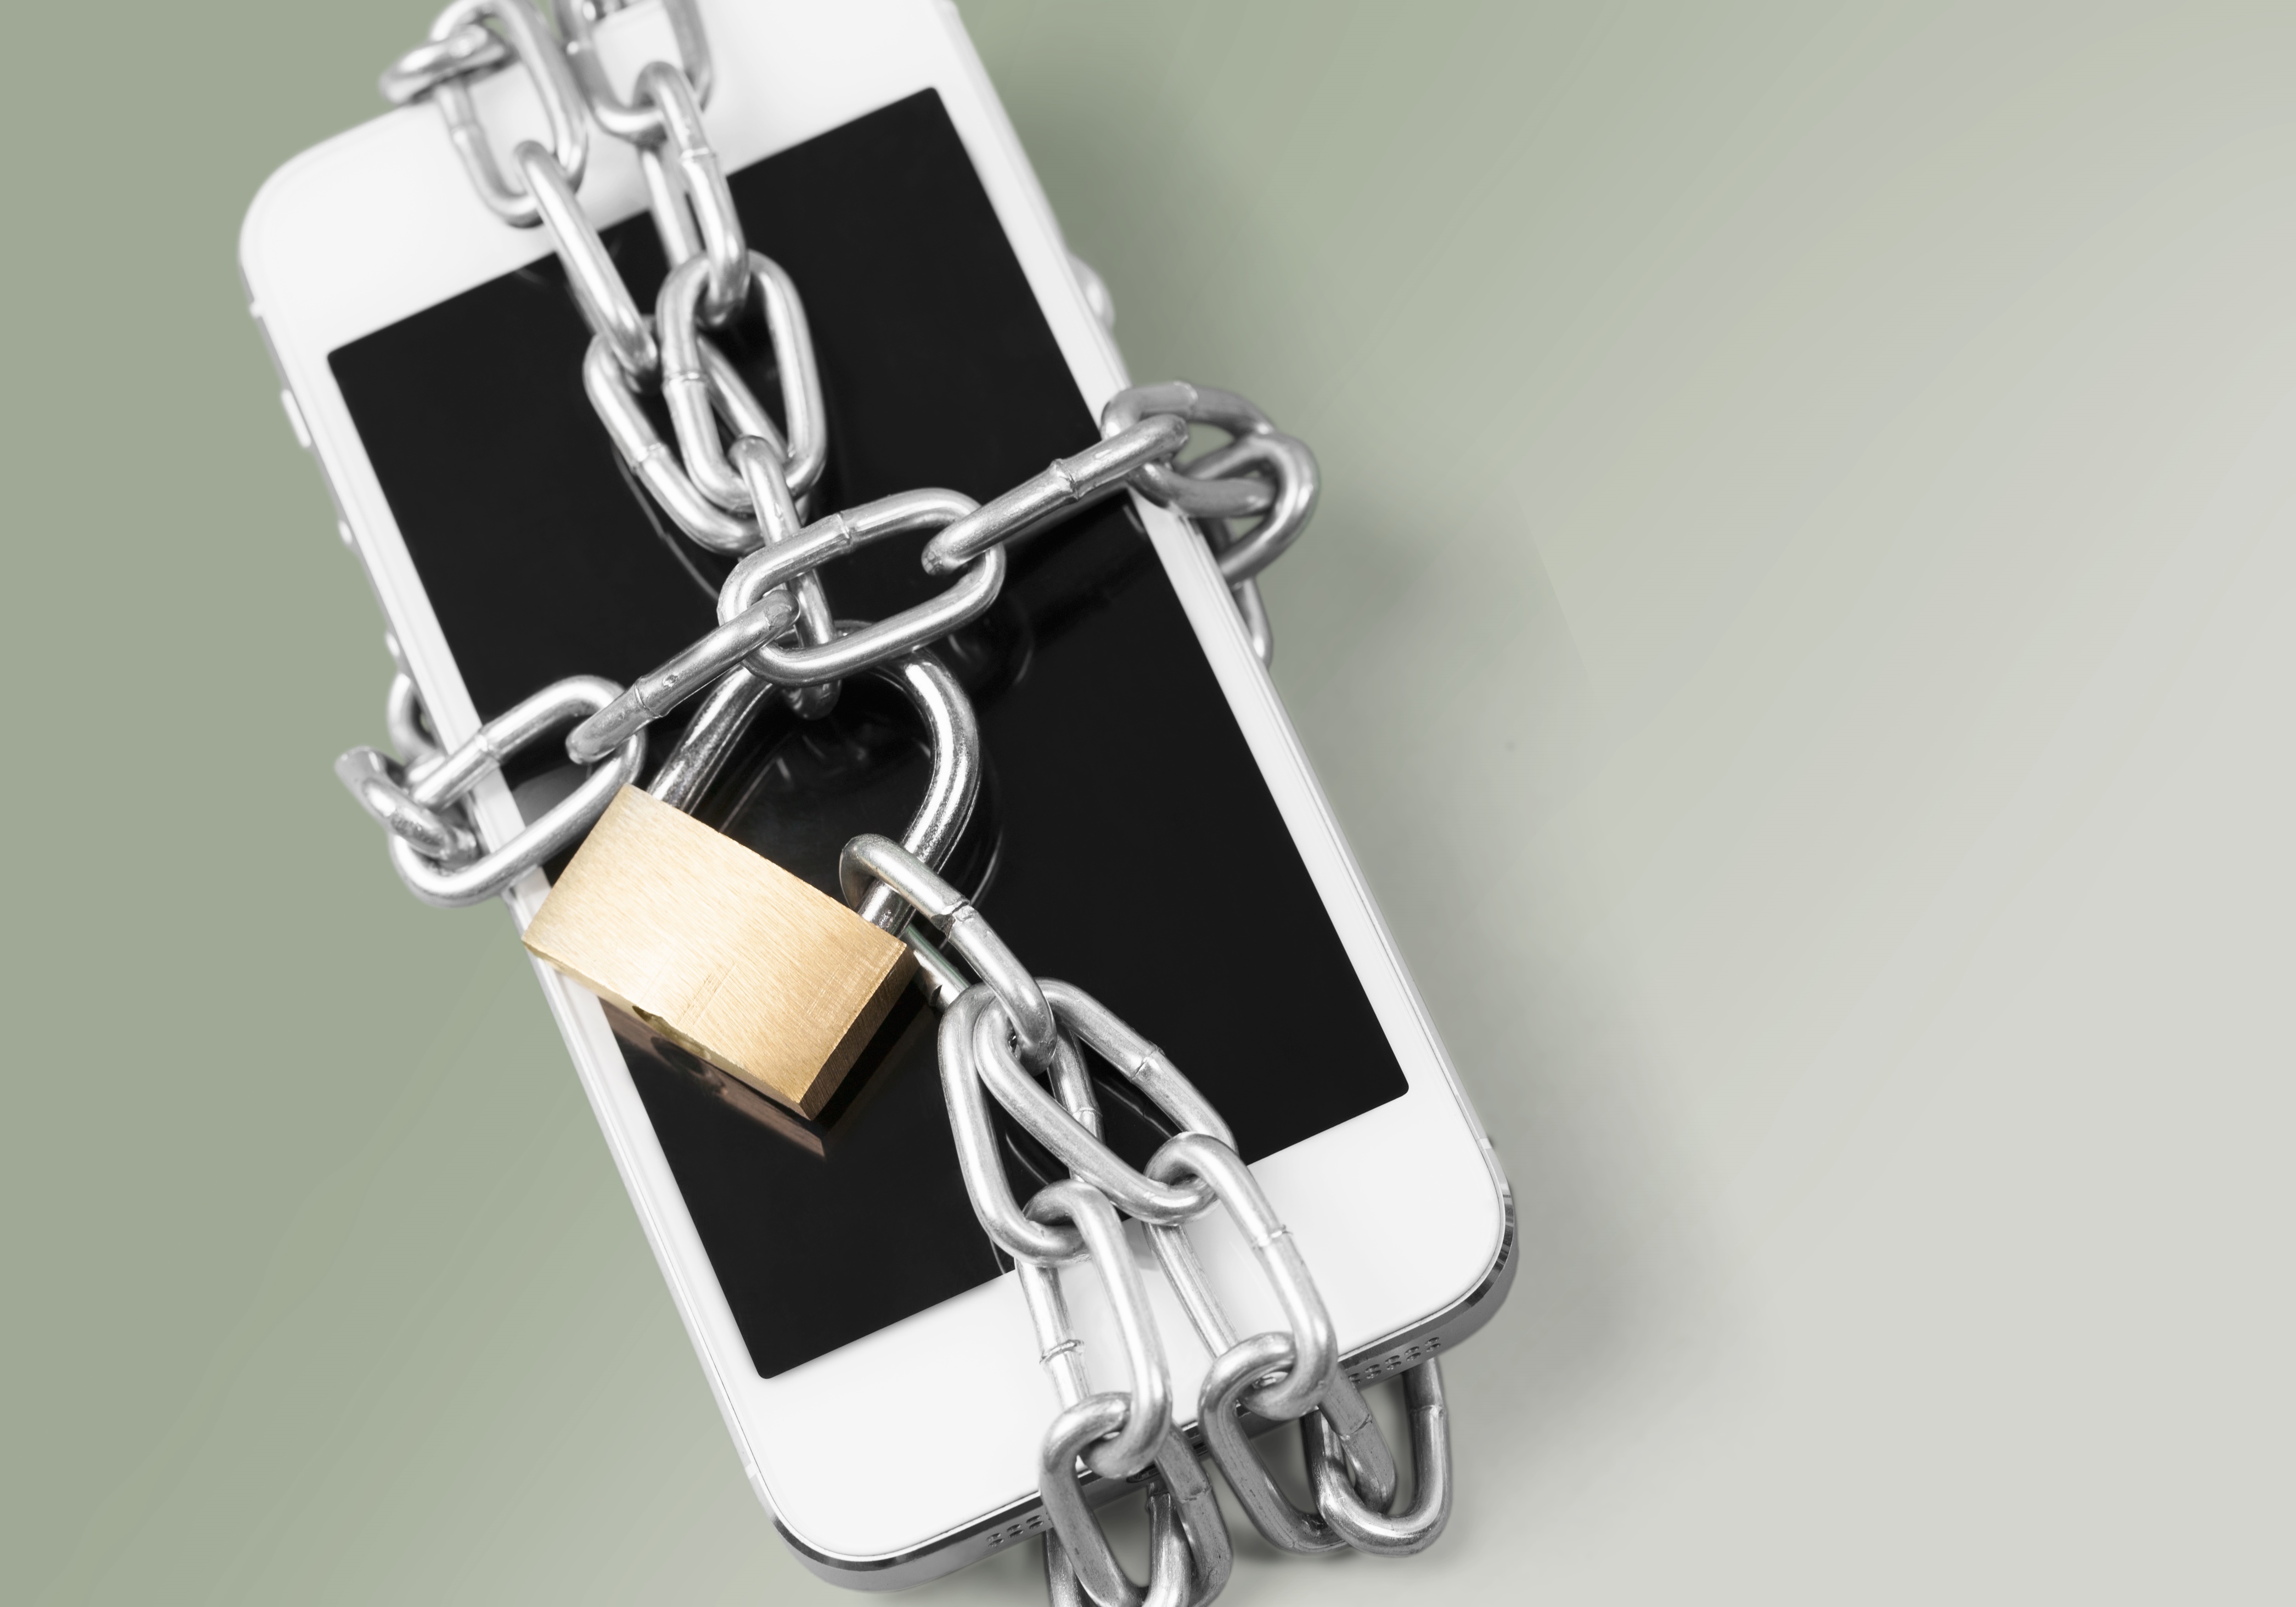 Litigation Update: The Government, Apple, and the Encryption Debate